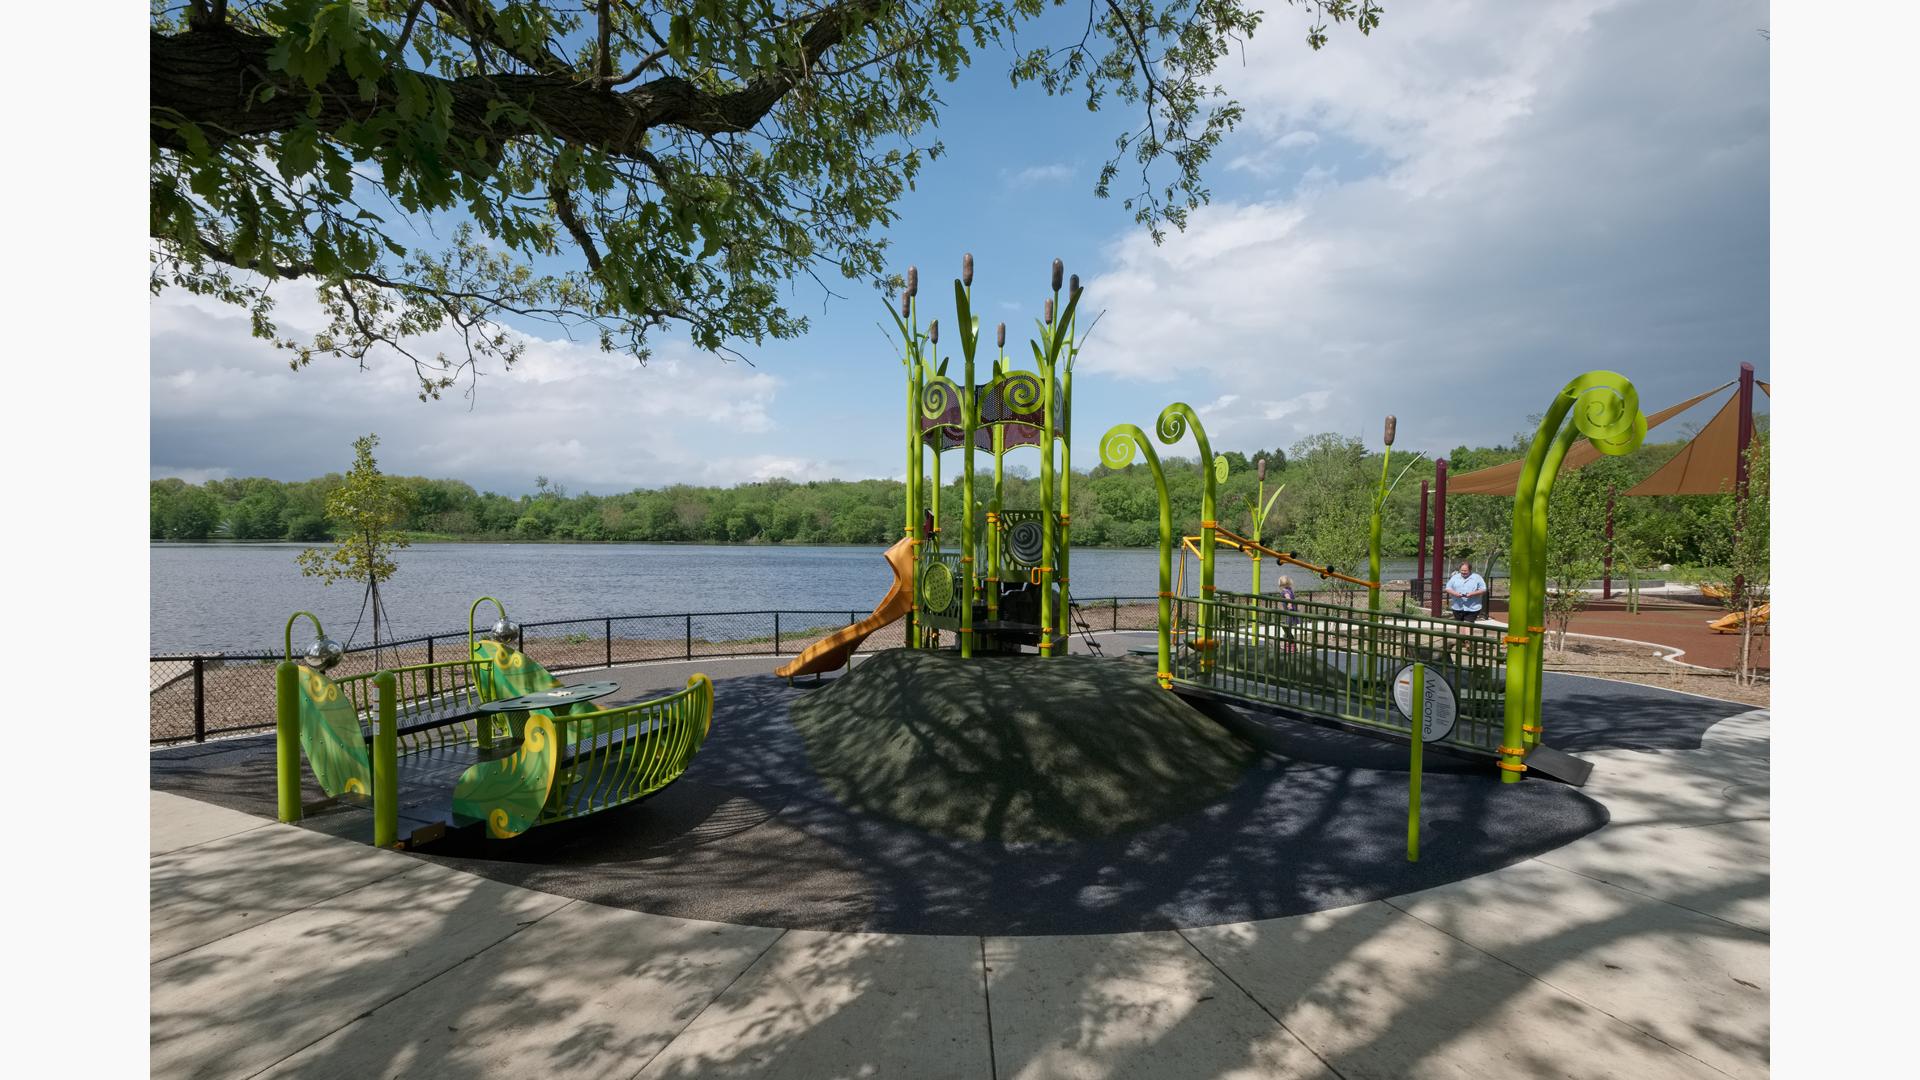 Located along with Huron River, the Gallup Park Rotary Playground a PlayBooster® play structure. A tower play structure mimicking a birds nest for ages 5 to 12. It also features a custom Sway Fun® Glider and concrete-sculpted animals, as well as SkyWays® shade products.